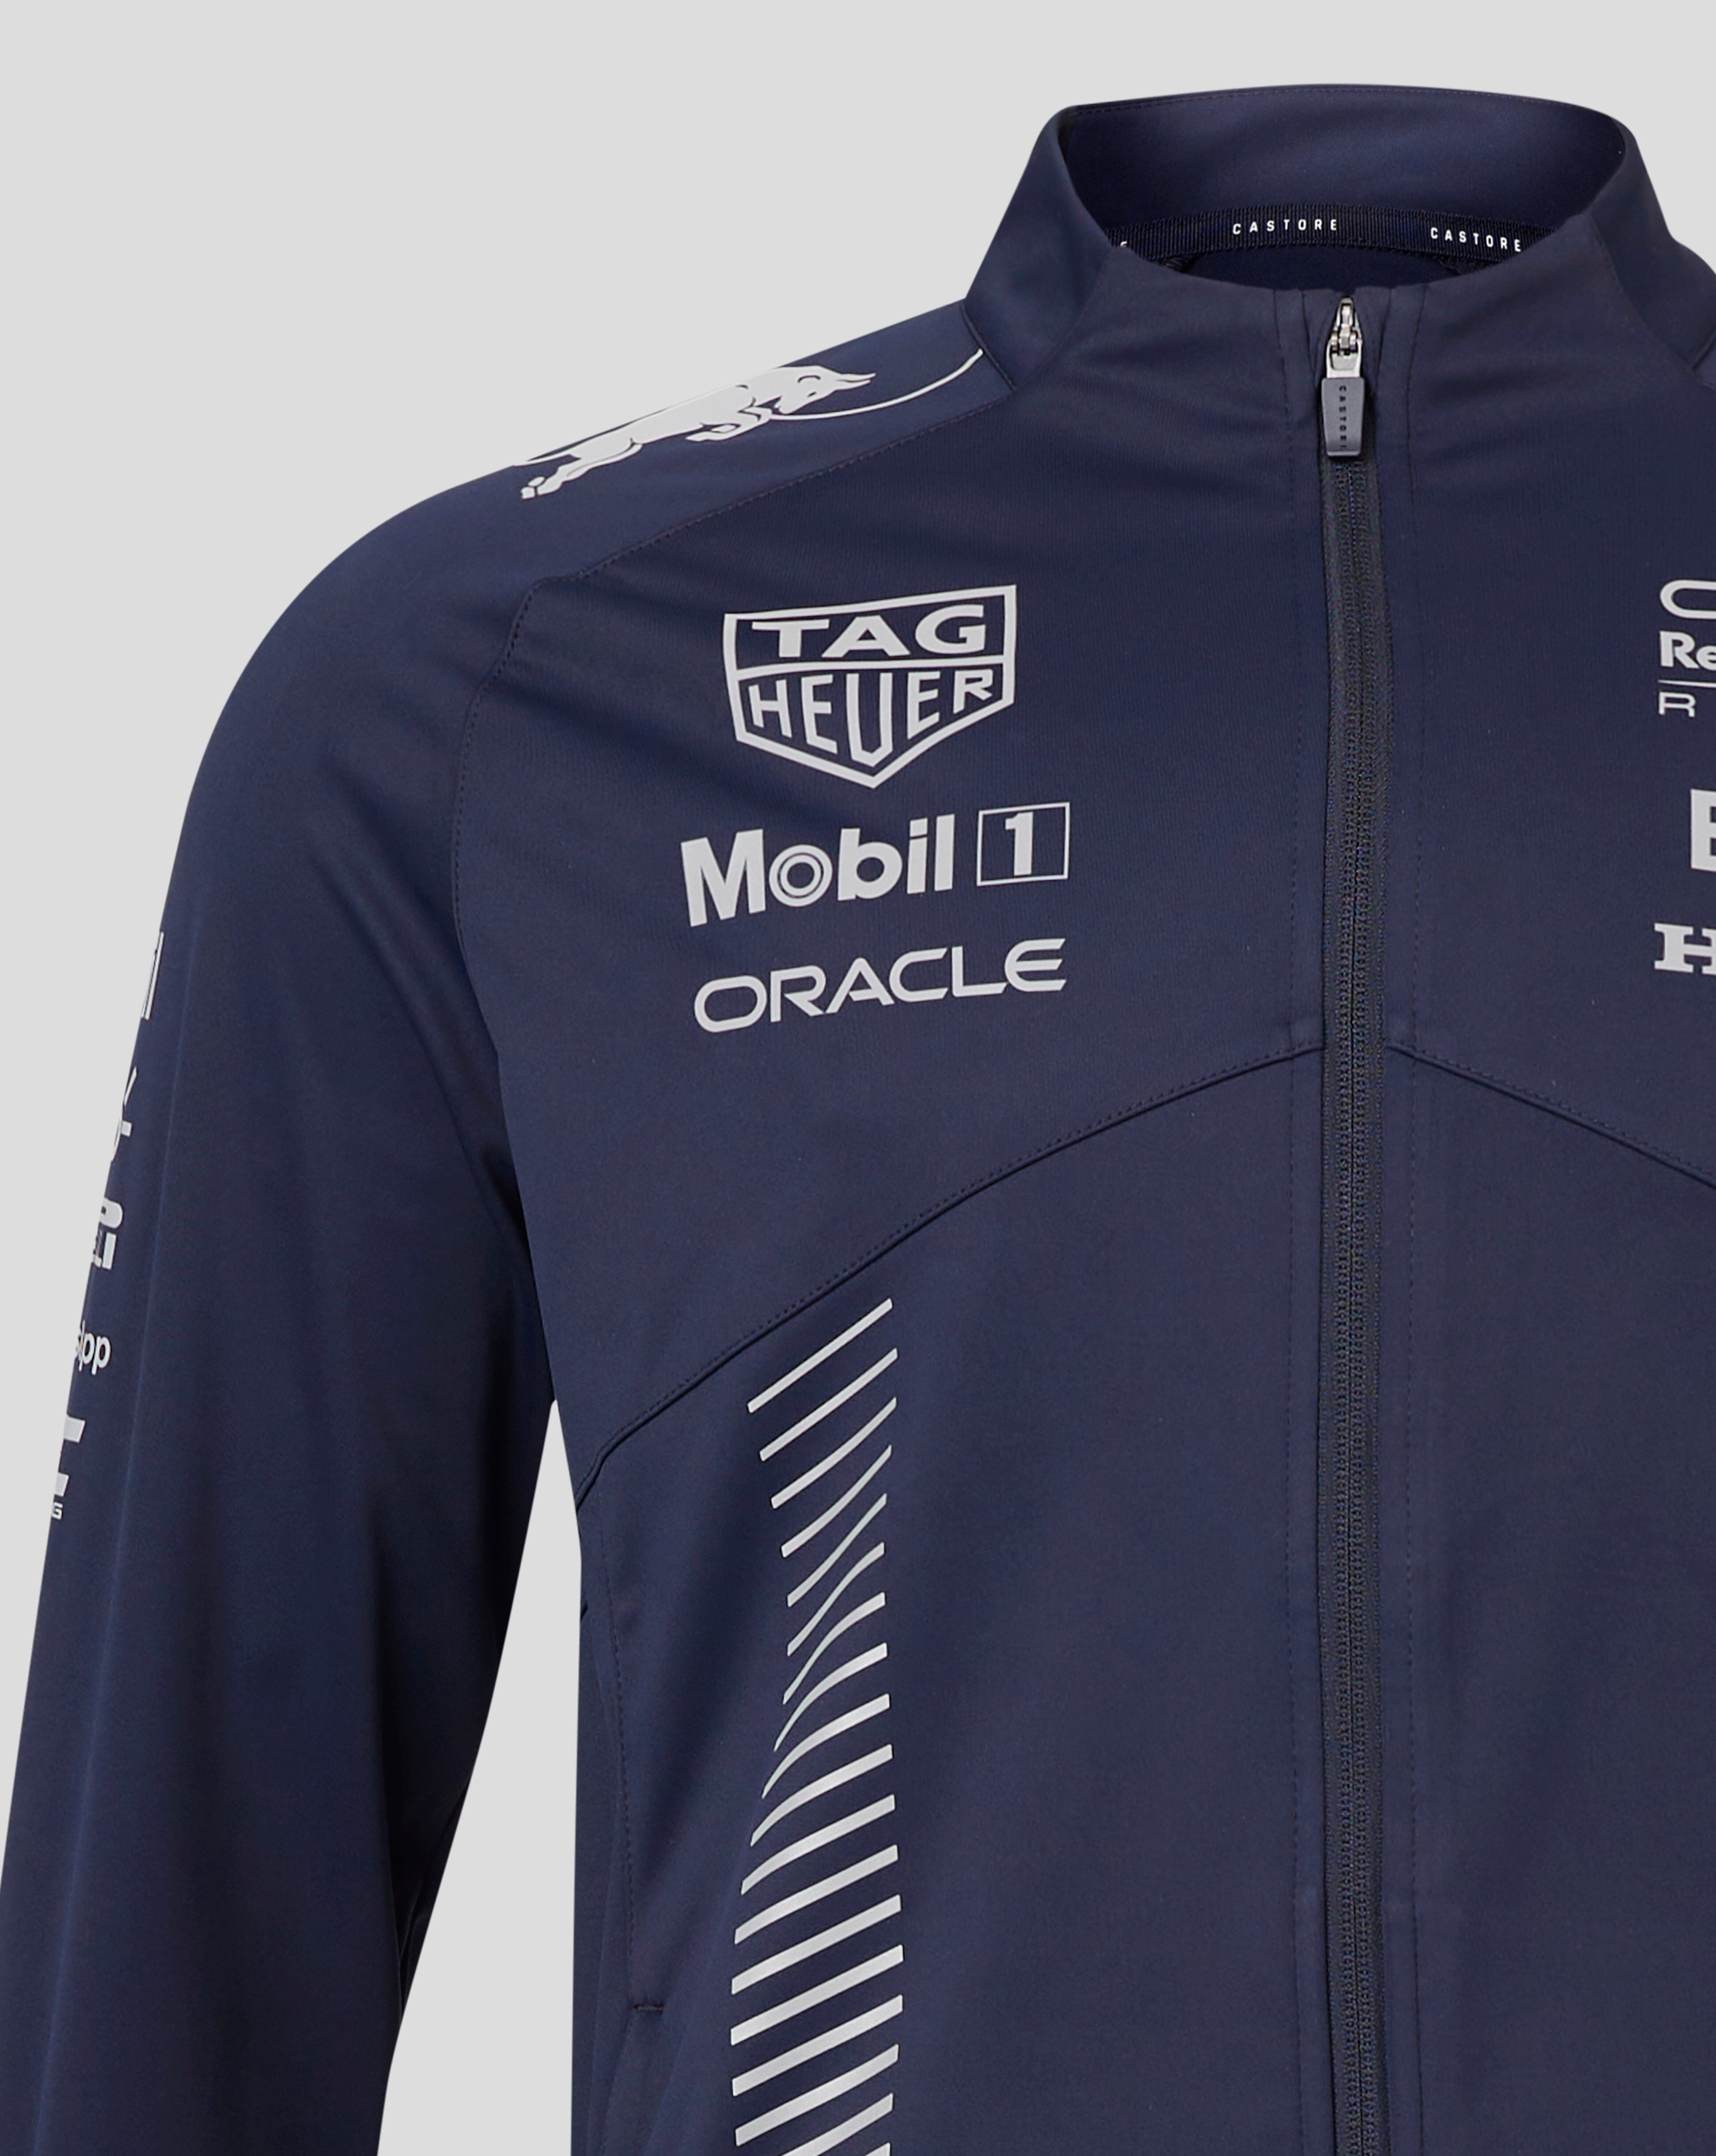 Jackets - Official Red Bull Online Shop